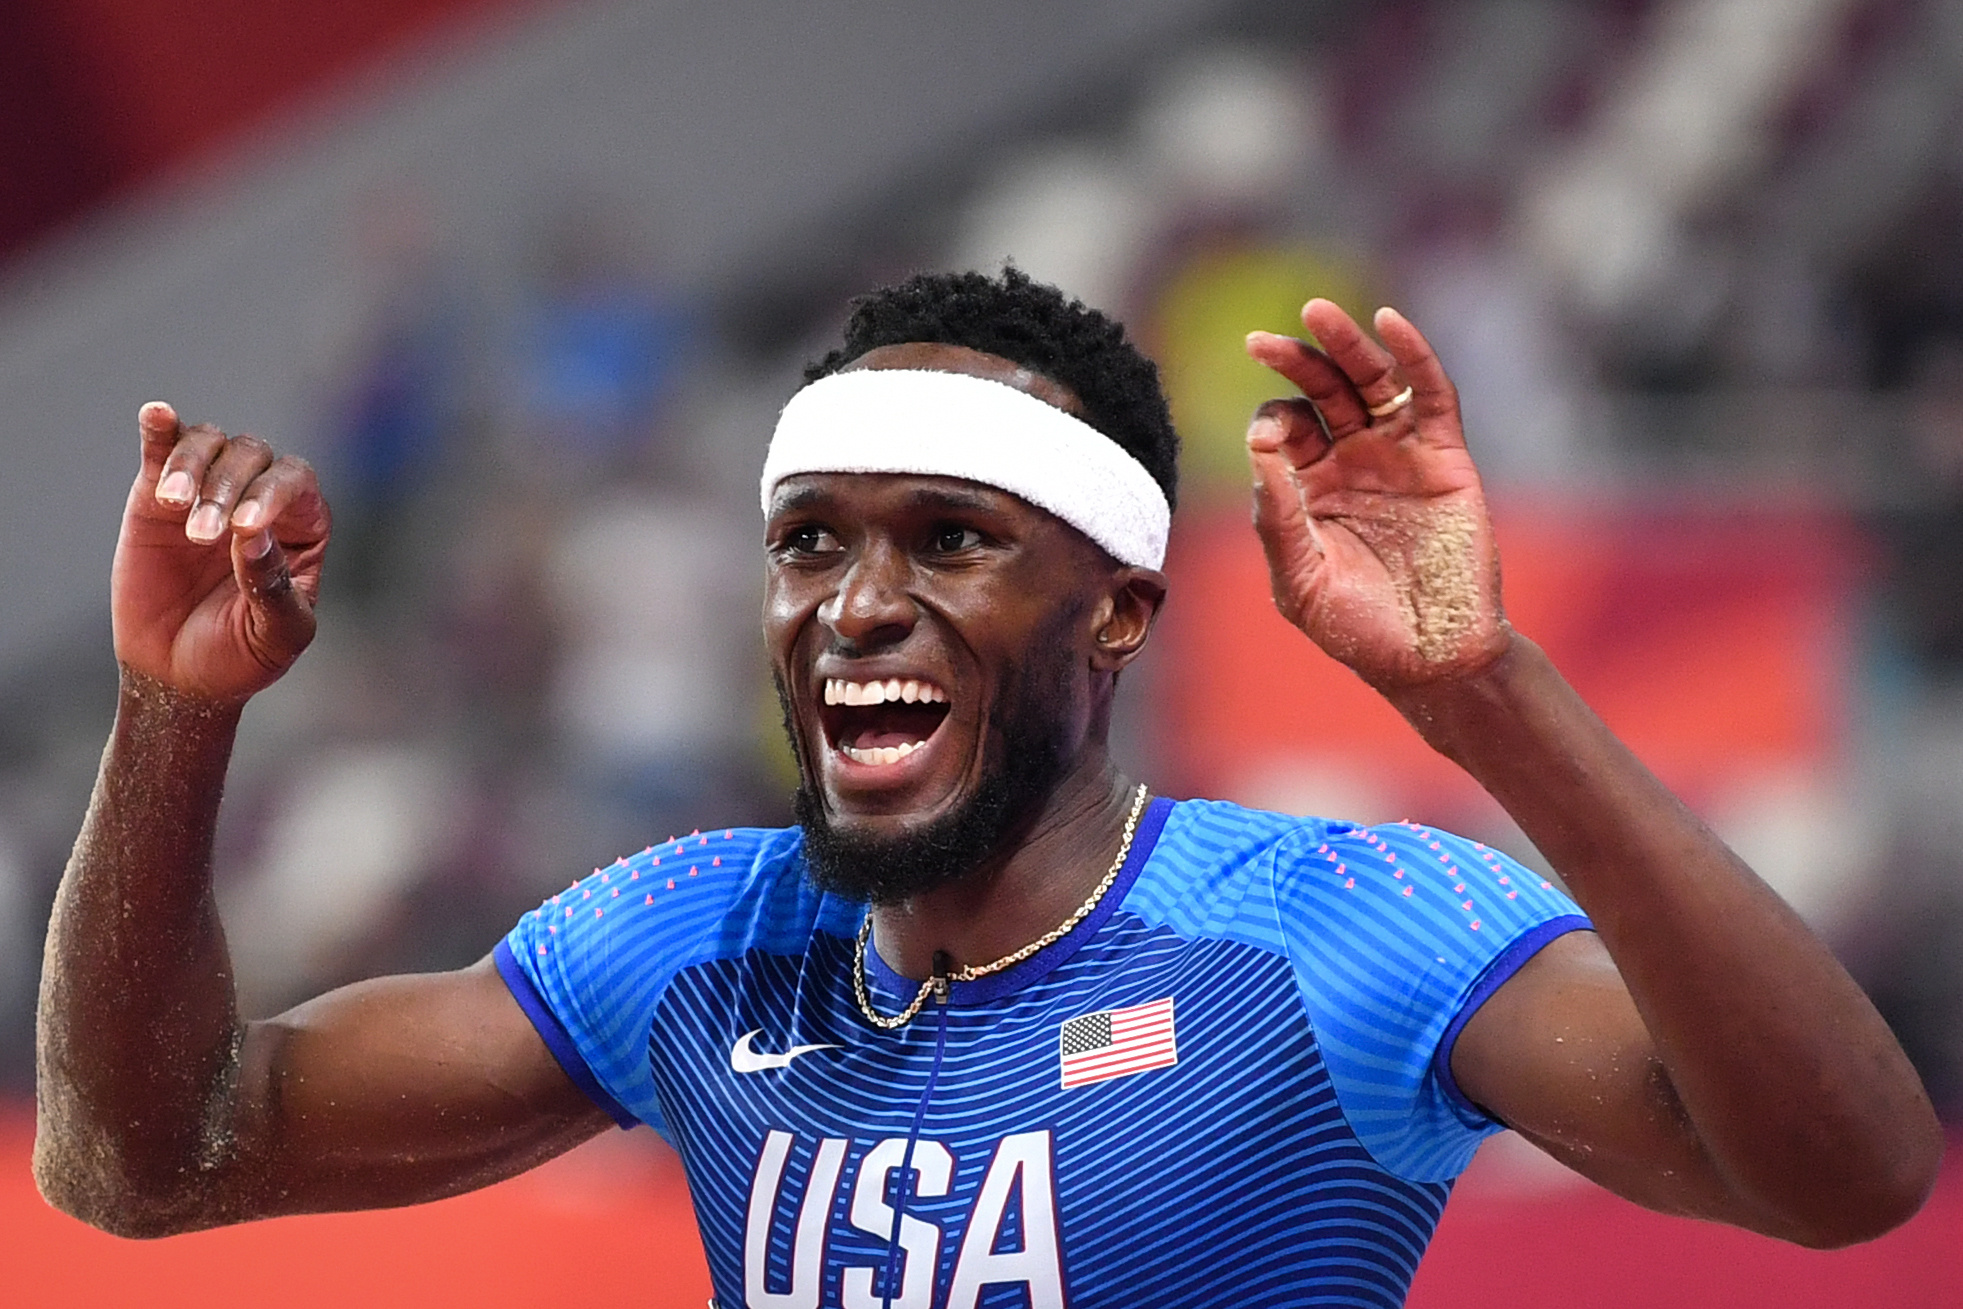 Will Claye, Olympian with music dreams, CNN video feature, 1970x1310 HD Desktop